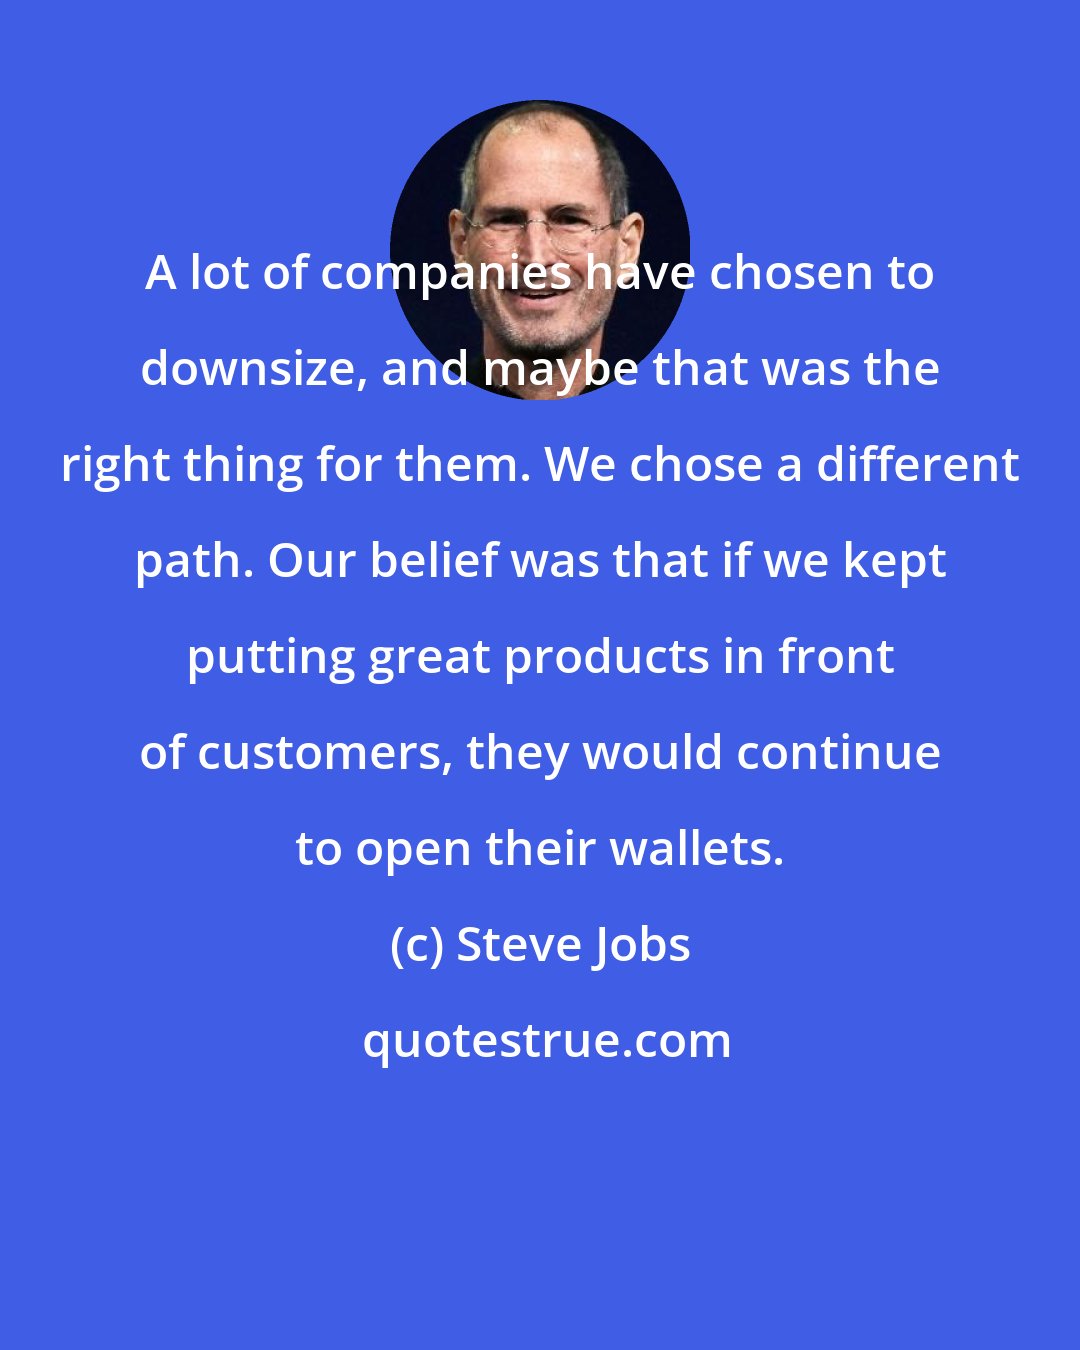 Steve Jobs: A lot of companies have chosen to downsize, and maybe that was the right thing for them. We chose a different path. Our belief was that if we kept putting great products in front of customers, they would continue to open their wallets.